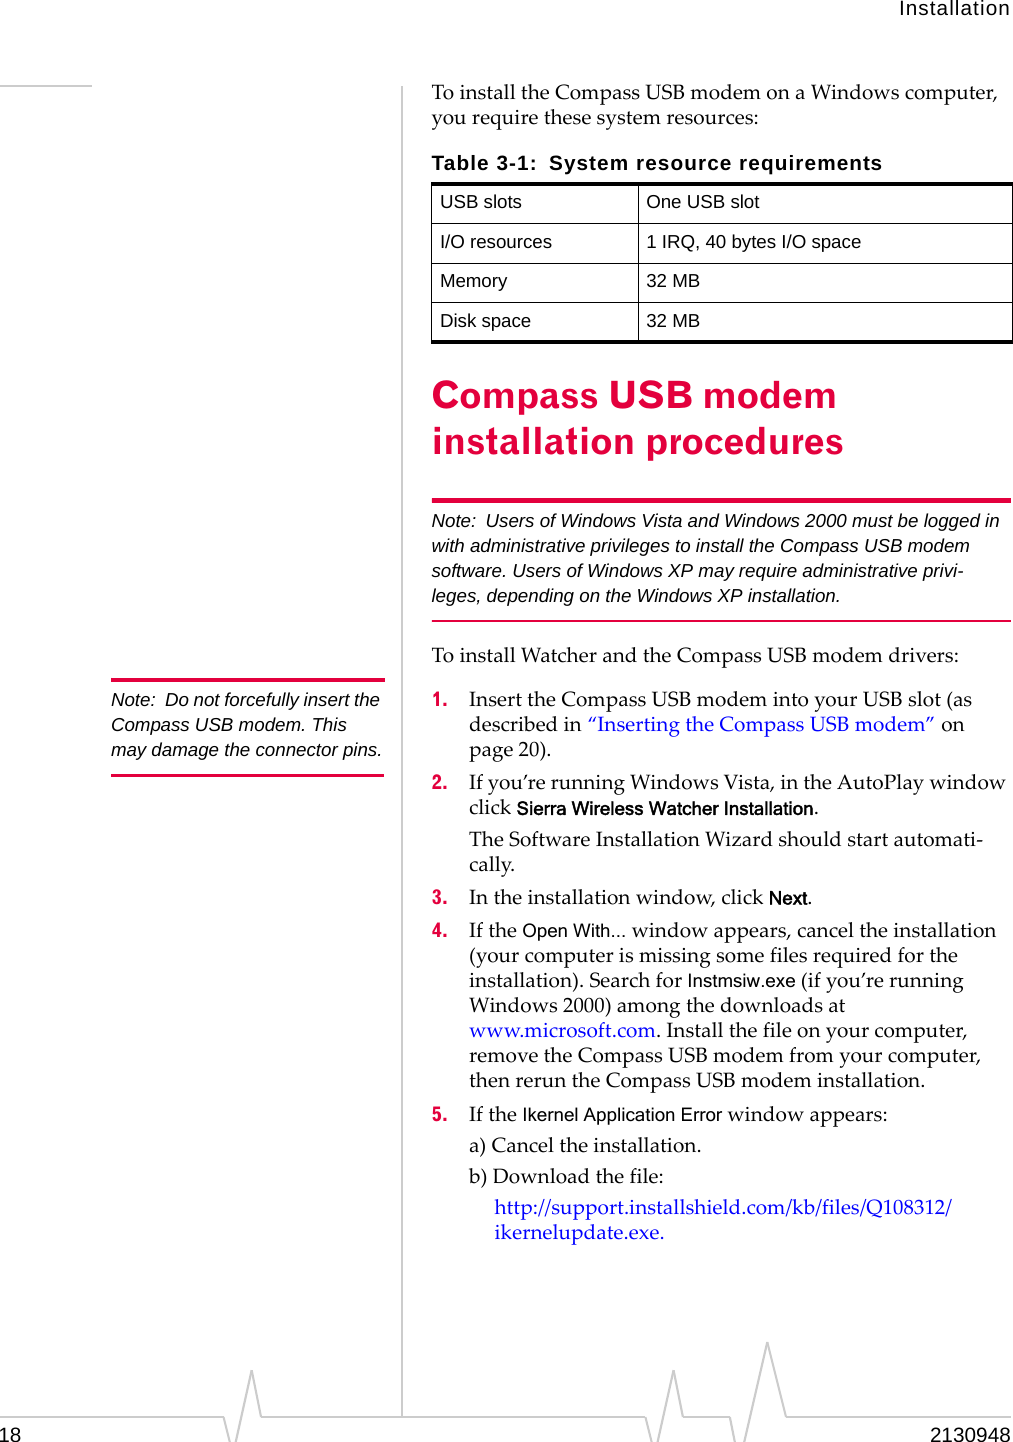 Installation18 2130948ToinstalltheCompassUSBmodemonaWindowscomputer,yourequirethesesystemresources:Compass USB modem installation proceduresNote: Users of Windows Vista and Windows 2000 must be logged in with administrative privileges to install the Compass USB modem software. Users of Windows XP may require administrative privi-leges, depending on the Windows XP installation.ToinstallWatcherandtheCompassUSBmodemdrivers:Note: Do not forcefully insert the Compass USB modem. This may damage the connector pins.1. InserttheCompassUSBmodemintoyourUSBslot(asdescribedin“InsertingtheCompassUSBmodem”onpage 20).2. Ifyou’rerunningWindowsVista,intheAutoPlaywindowclickSierra Wireless Watcher Installation.TheSoftwareInstallationWizardshouldstartautomati‐cally.3. Intheinstallationwindow,clickNext.4. IftheOpen With...windowappears,canceltheinstallation(yourcomputerismissingsomefilesrequiredfortheinstallation).SearchforInstmsiw.exe(ifyou’rerunningWindows2000)amongthedownloadsatwww.microsoft.com.Installthefileonyourcomputer,removetheCompassUSBmodemfromyourcomputer,thenreruntheCompassUSBmodeminstallation.5. IftheIkernel Application Errorwindowappears:a)Canceltheinstallation.b)Downloadthefile:http://support.installshield.com/kb/files/Q108312/ikernelupdate.exe.Table 3-1: System resource requirementsUSB slots One USB slotI/O resources 1 IRQ, 40 bytes I/O spaceMemory 32 MBDisk space 32 MB